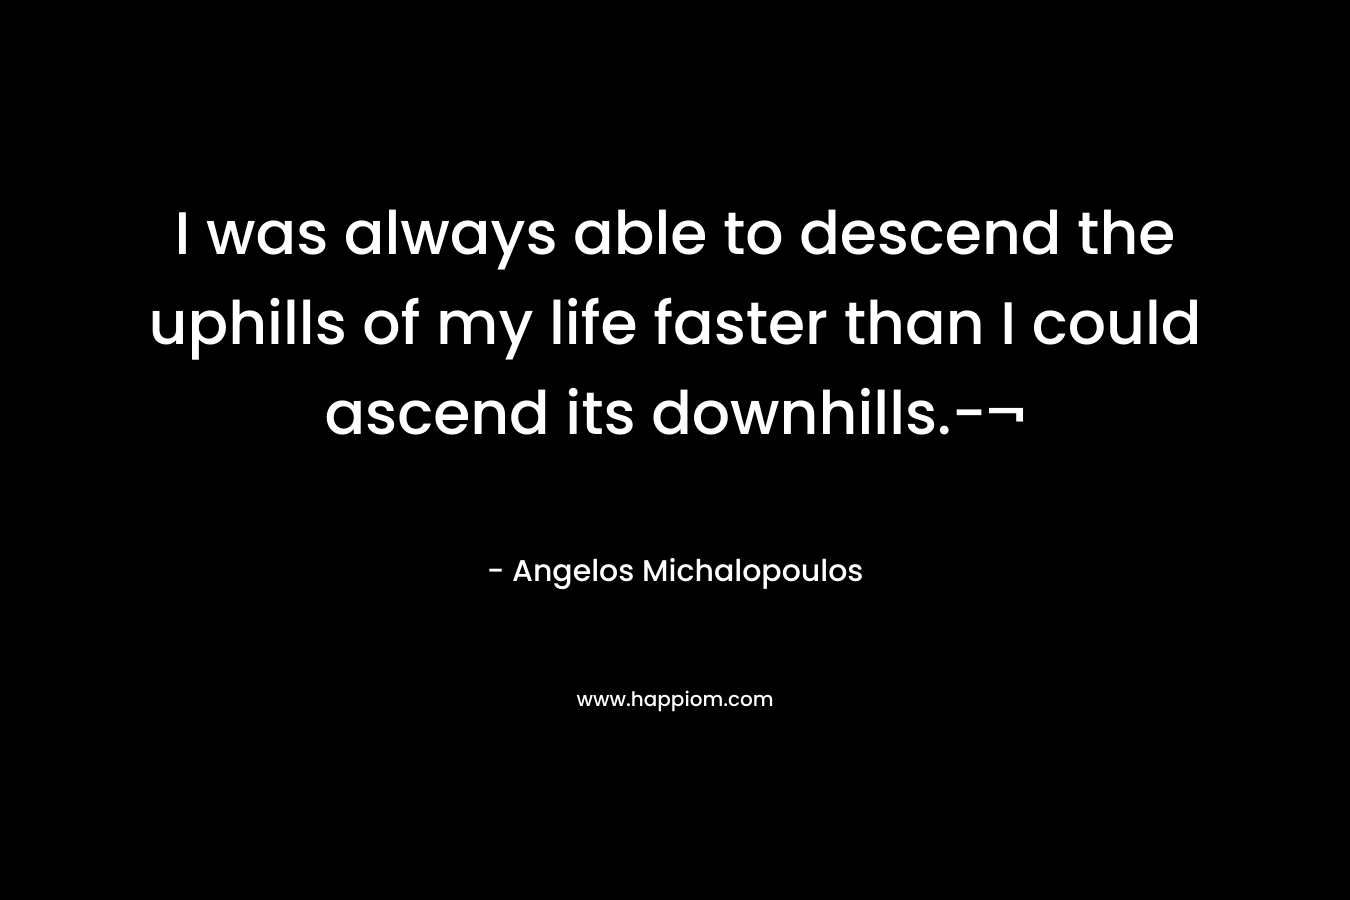 I was always able to descend the uphills of my life faster than I could ascend its downhills.-¬ – Angelos Michalopoulos